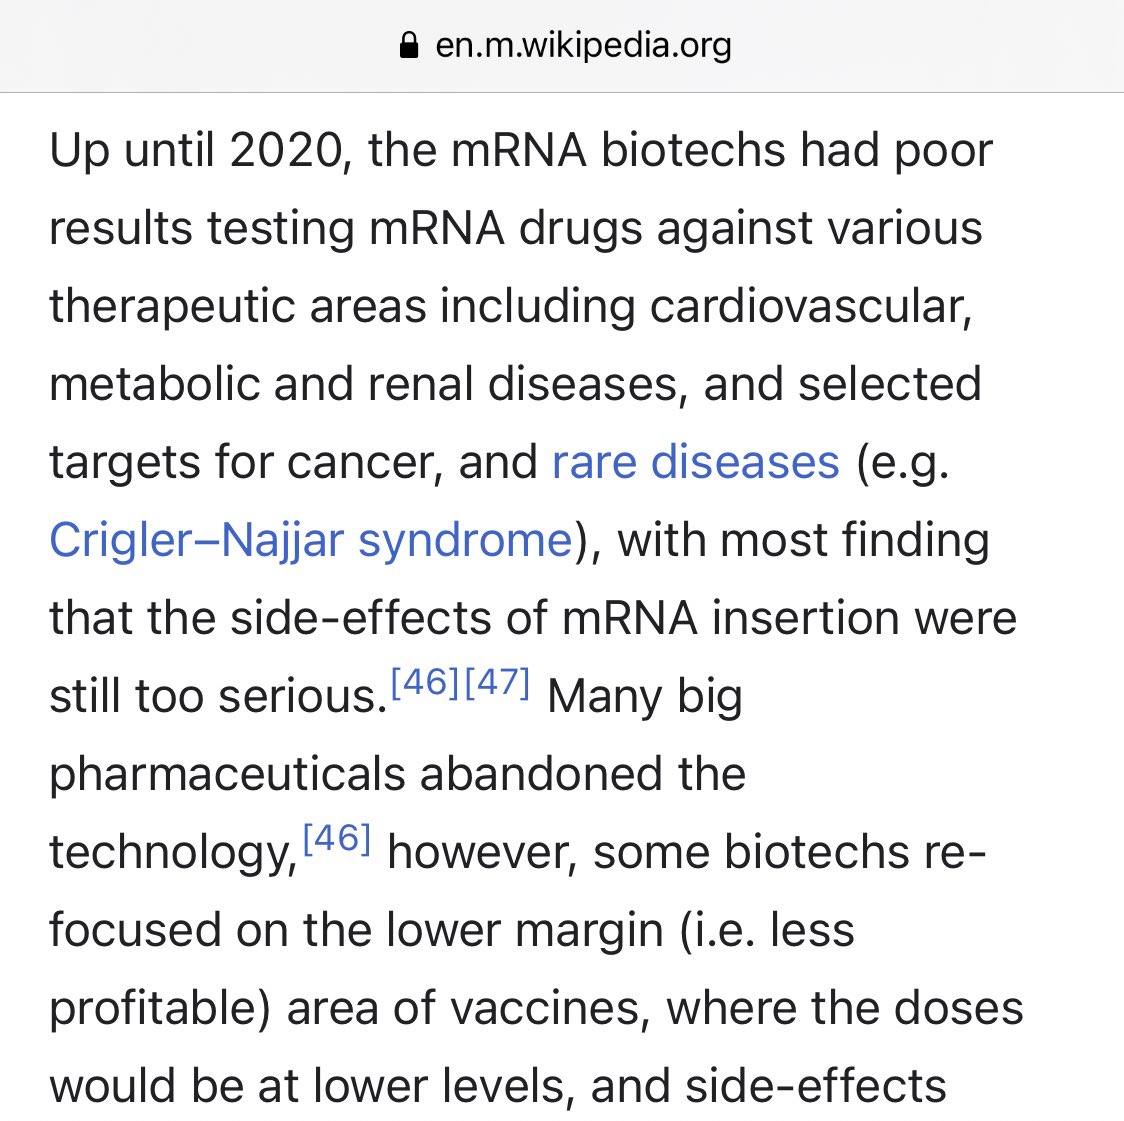 Wikipedia seems to have deleted the wording admitting before 2020 the synthetic mRNA vaccine was theoretical & experimental. But they left up this part explaining early mRNA attempts were abandoned due to serious side effects. I’m sure they’ll delete this soon.